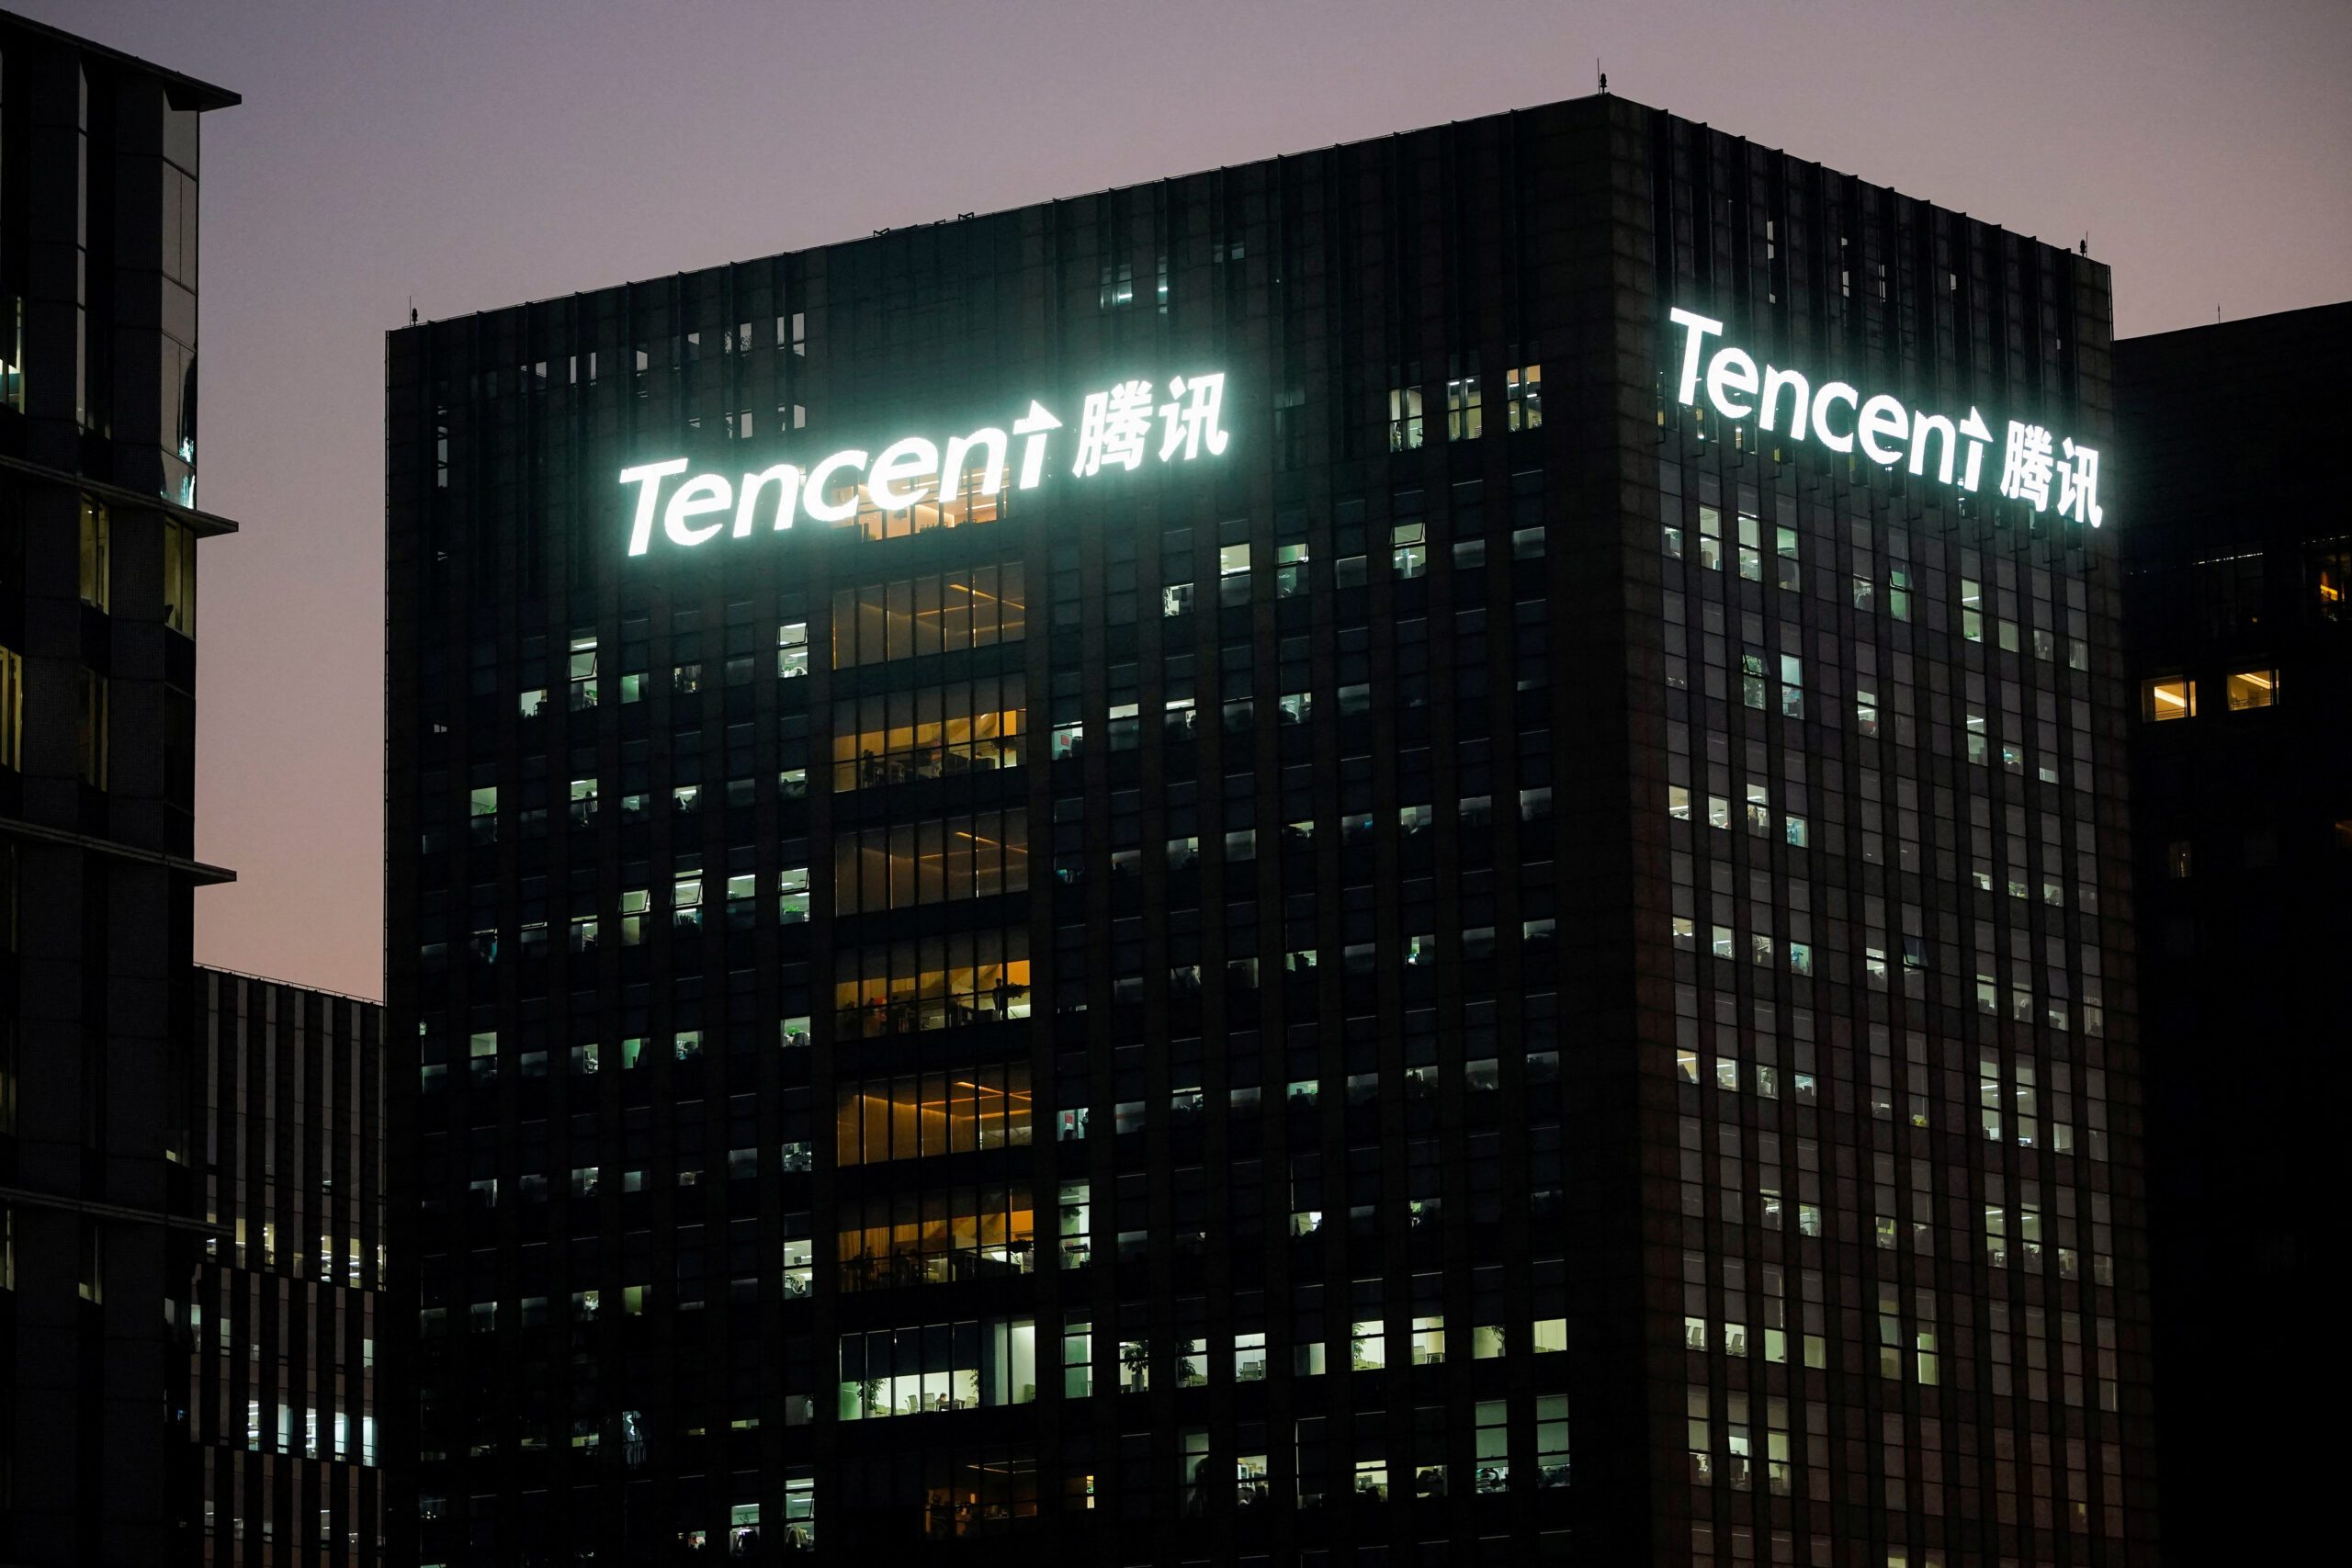 FILE PHOTO: The logo of Tencent is seen at a Tencent office in Shanghai, China, Dec. 13, 2021. REUTERS/Aly Song/File Photo